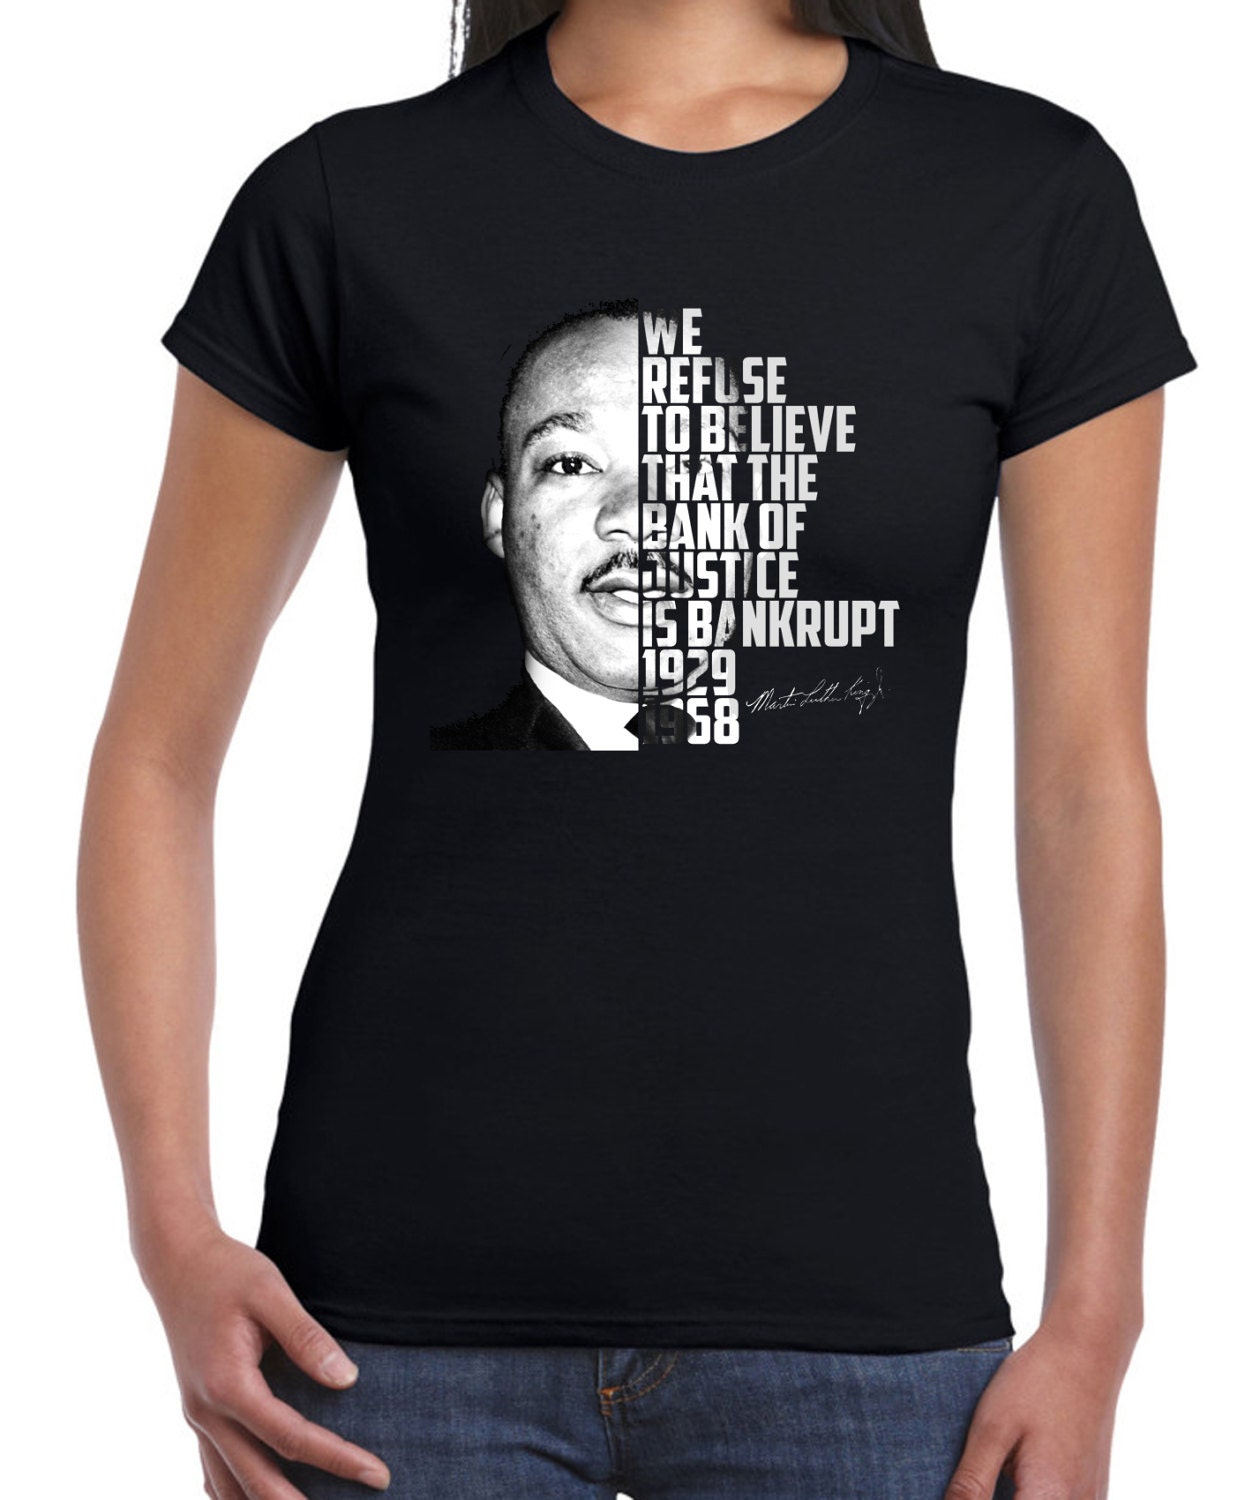 Martin Luther King Bankrupt Quote Women's T-Shirt MLK | Etsy